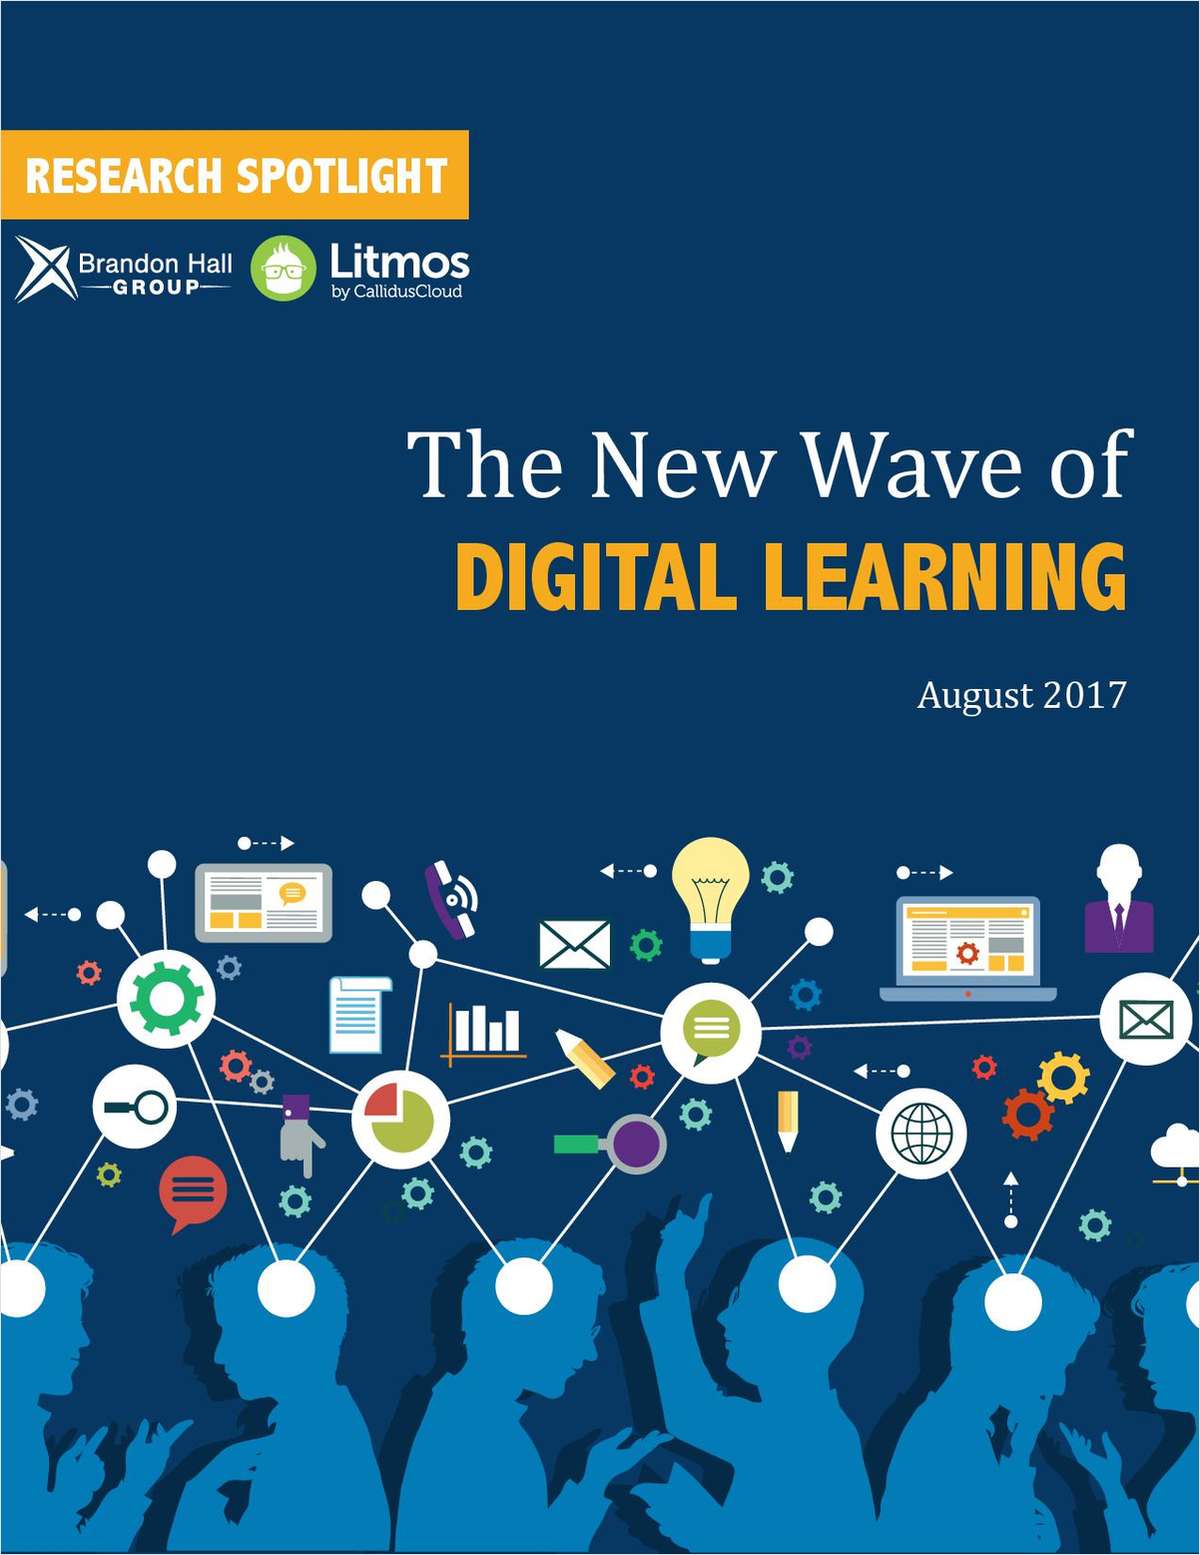 The New Wave of Digital Learning